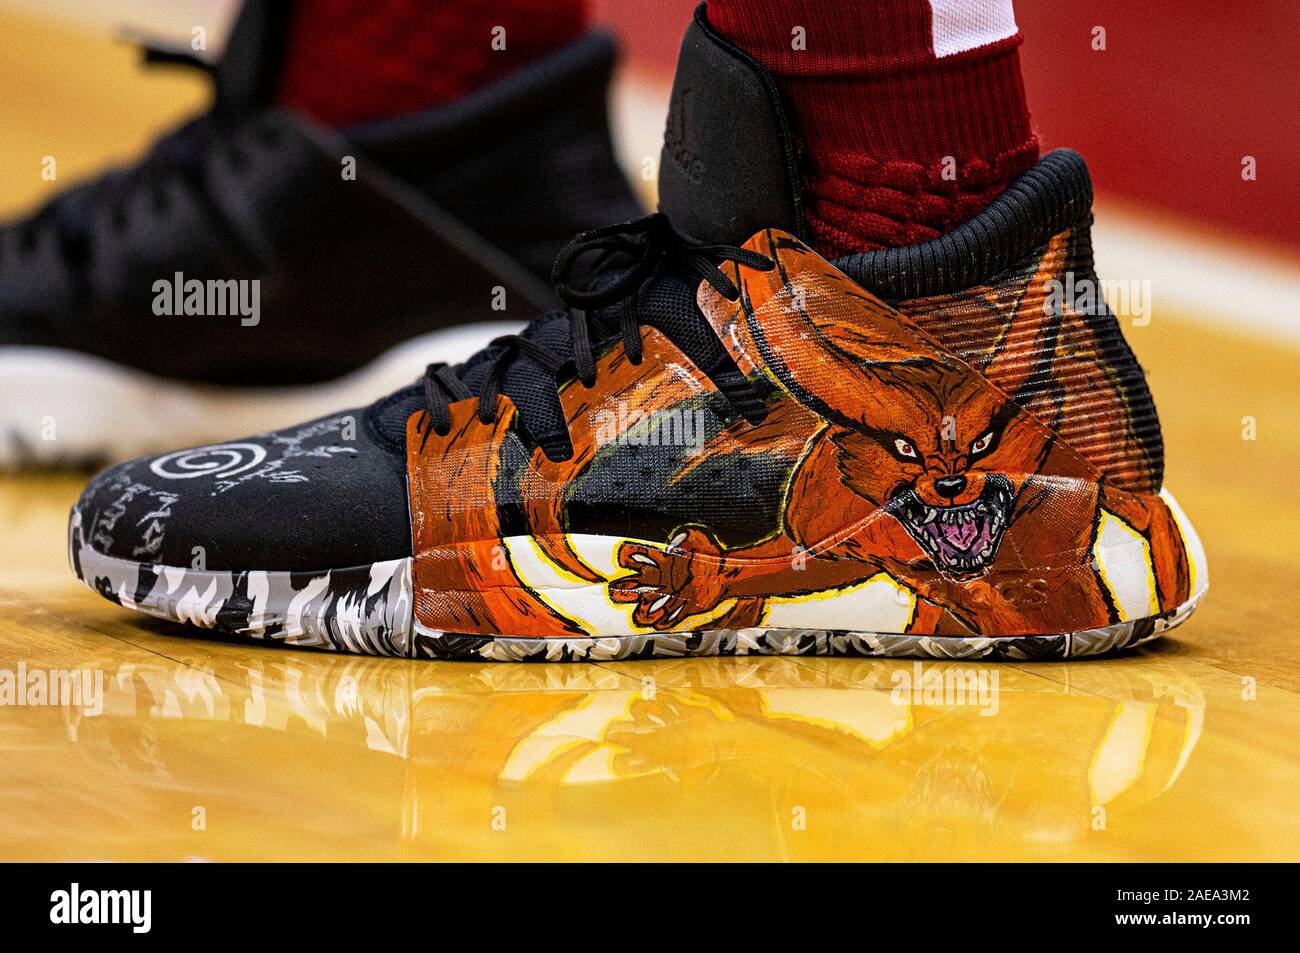 Madison, WI, USA. 7th Dec, 2019. Basketball Shoes worn by Indiana Hoosiers  guard Devonte Green #11 during the NCAA Basketball game between the Indiana  Hoosiers and the Wisconsin Badgers at the Kohl